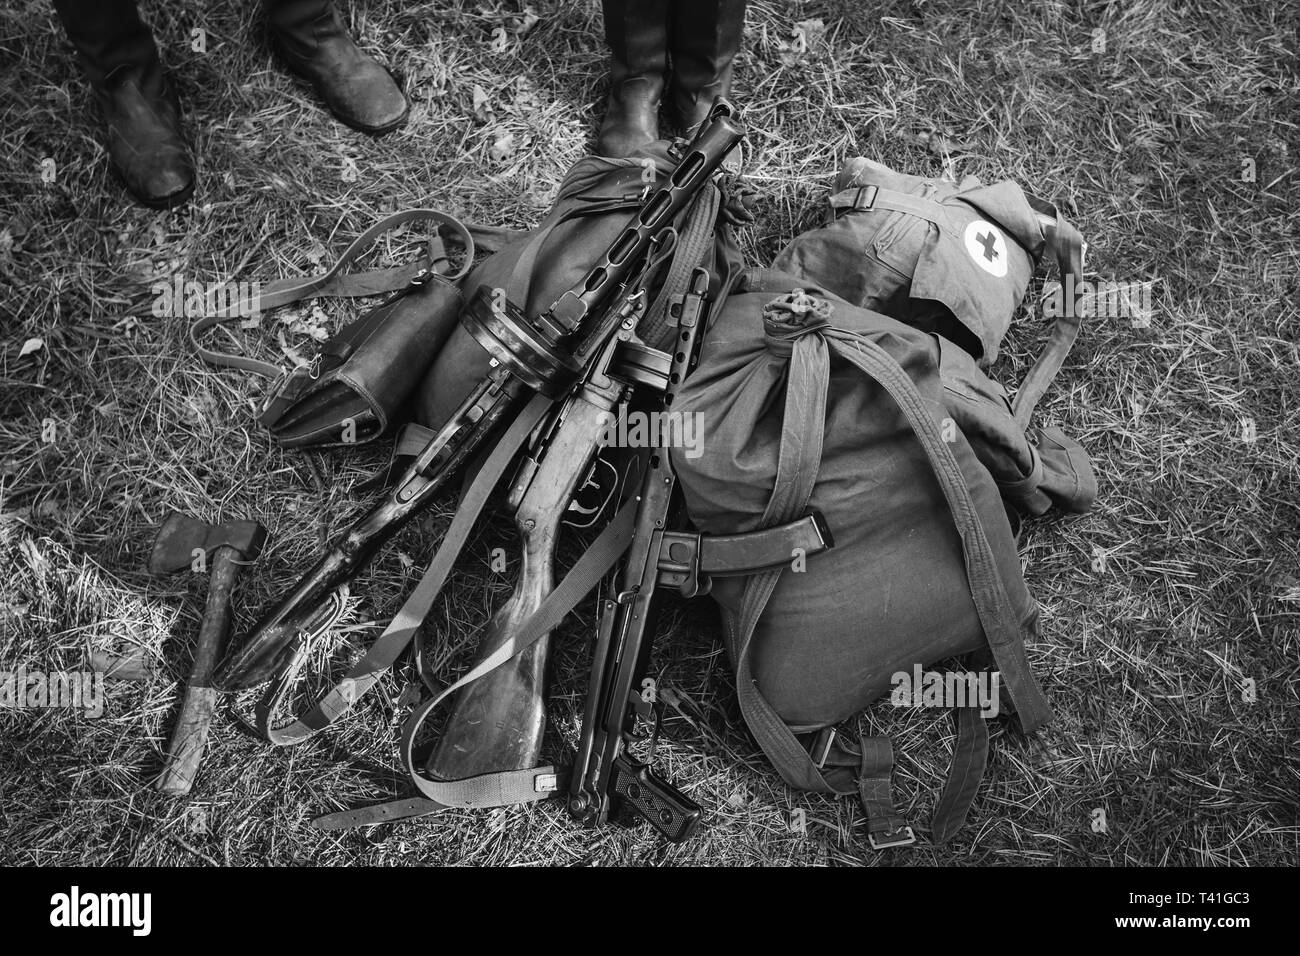 Soviet Russian Military Infantry Ammunition On Ground World War II Soviet Red Army Weapon. Submachine Guns PPS-43 And PPSh-41 On Ground. WWII WW2 Russ Stock Photo